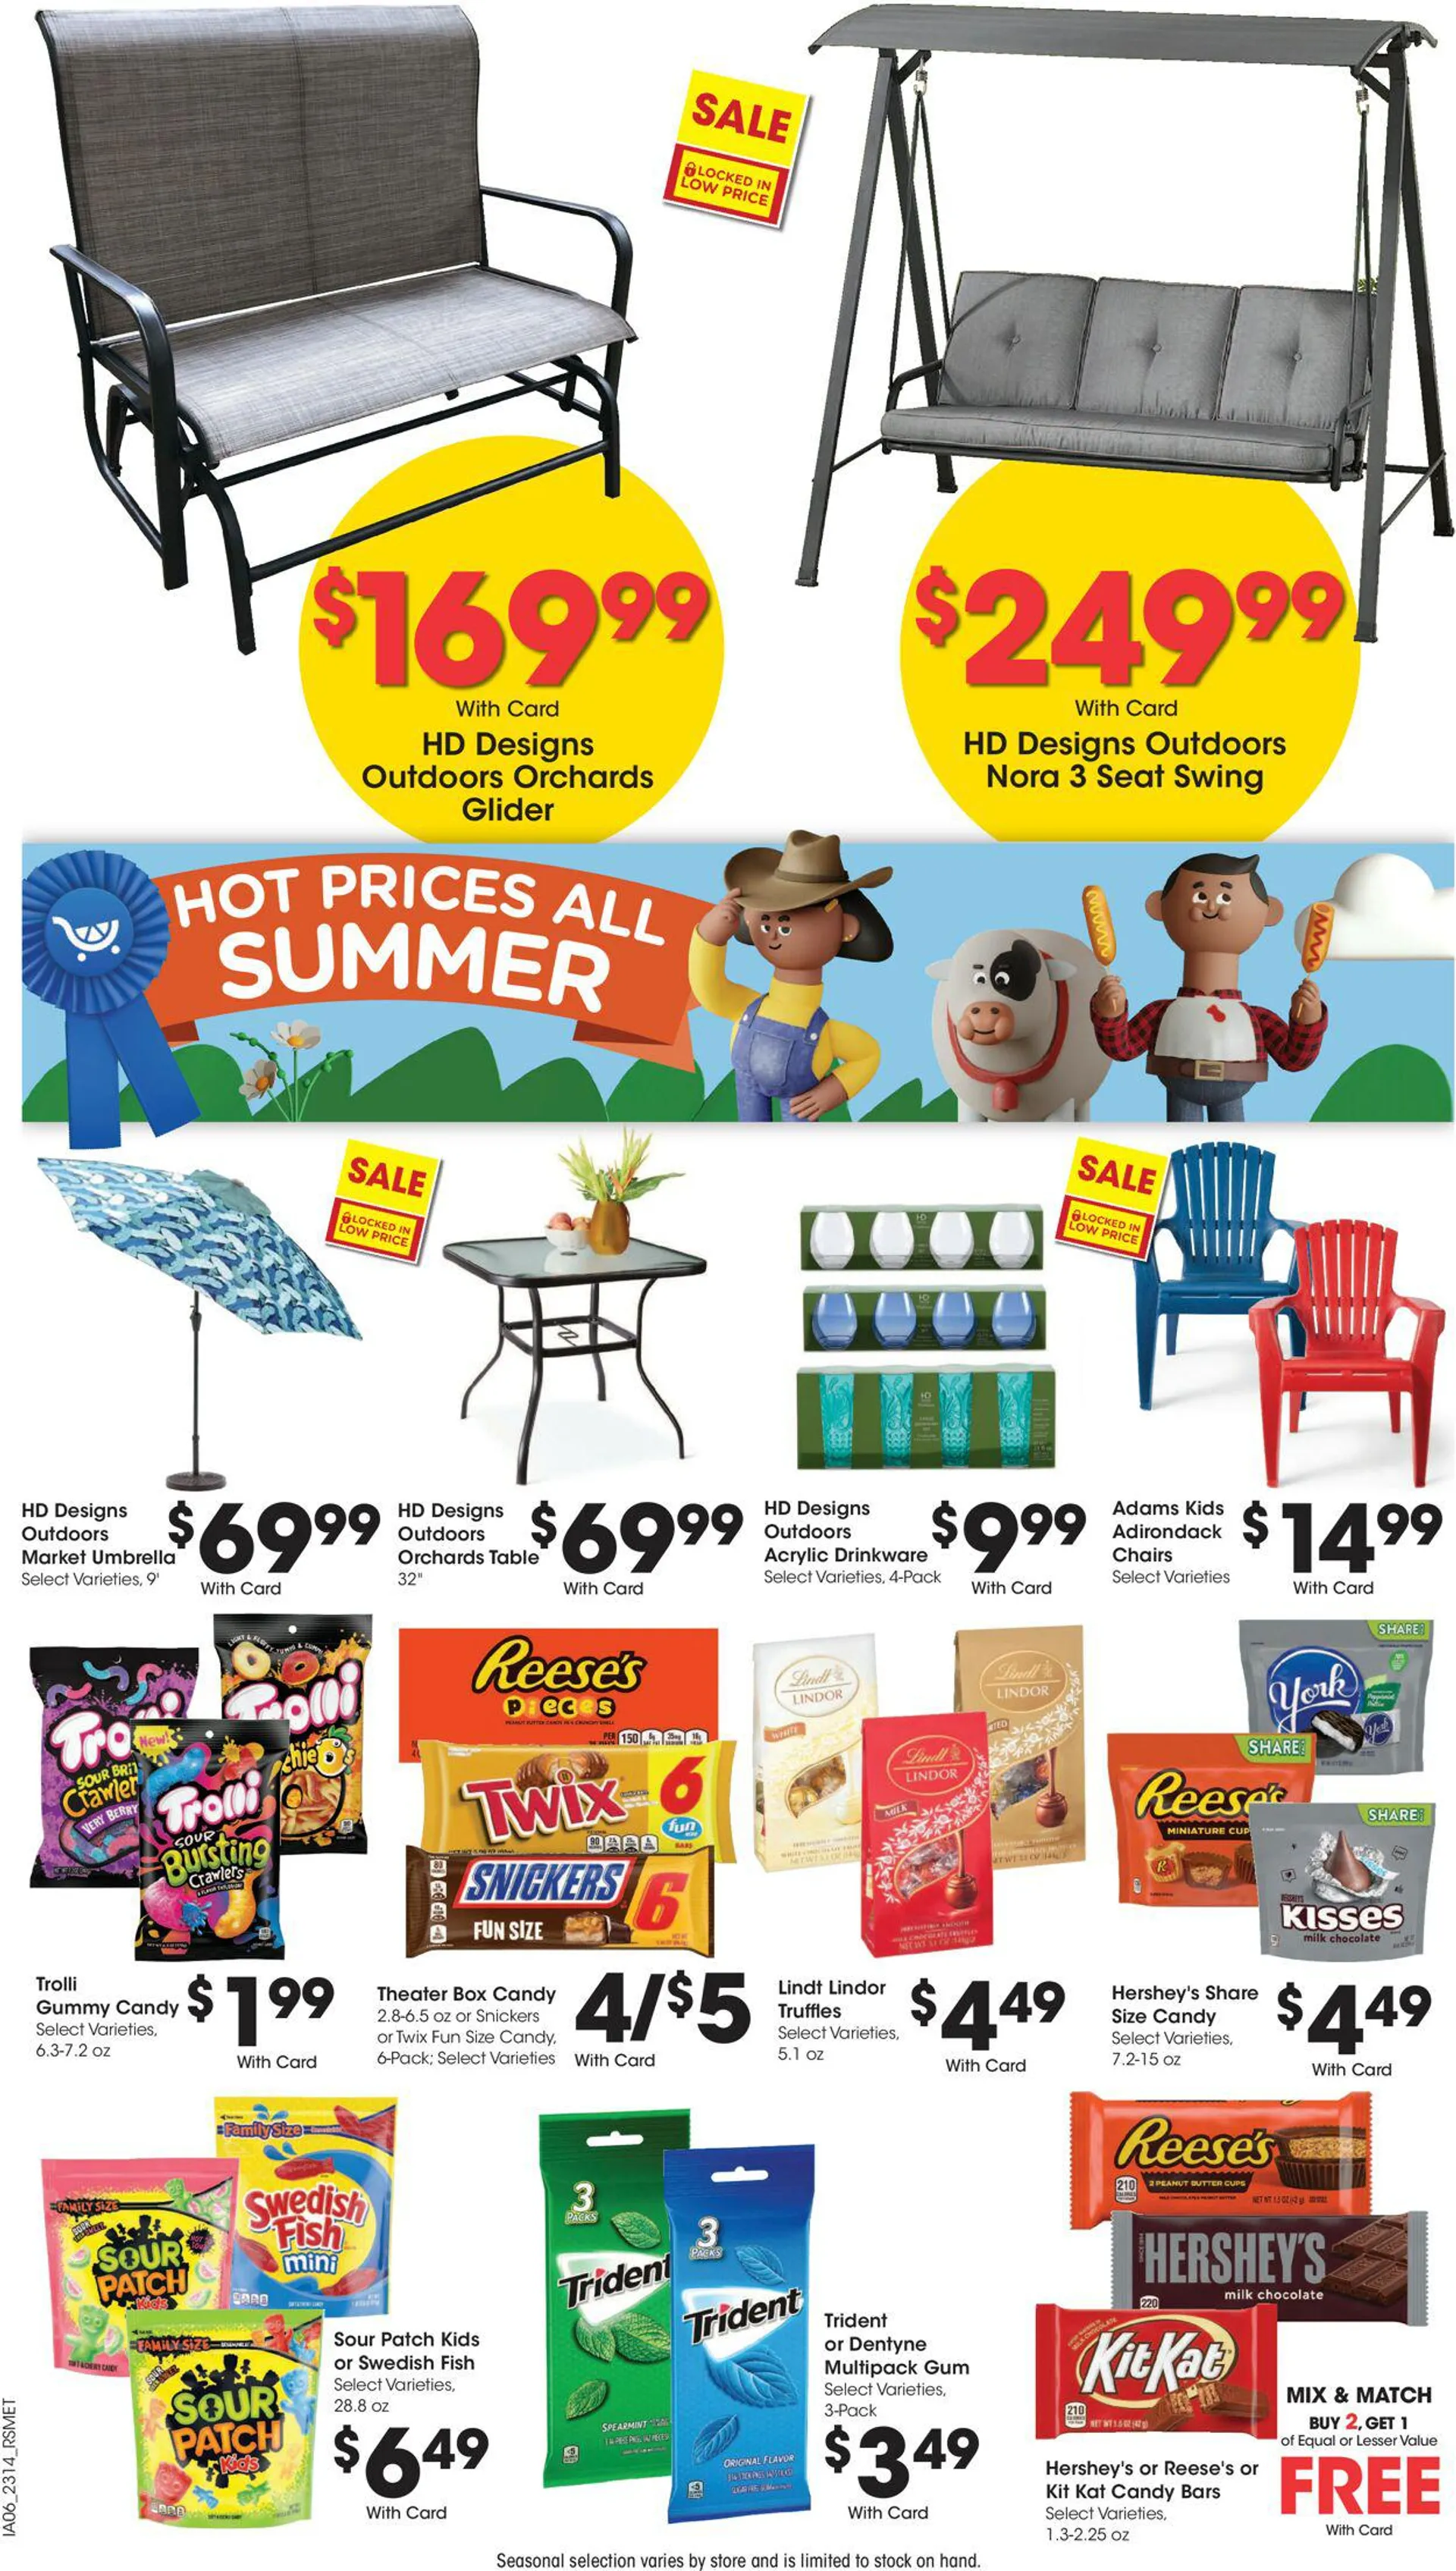 Pick ‘n Save Current weekly ad - 14